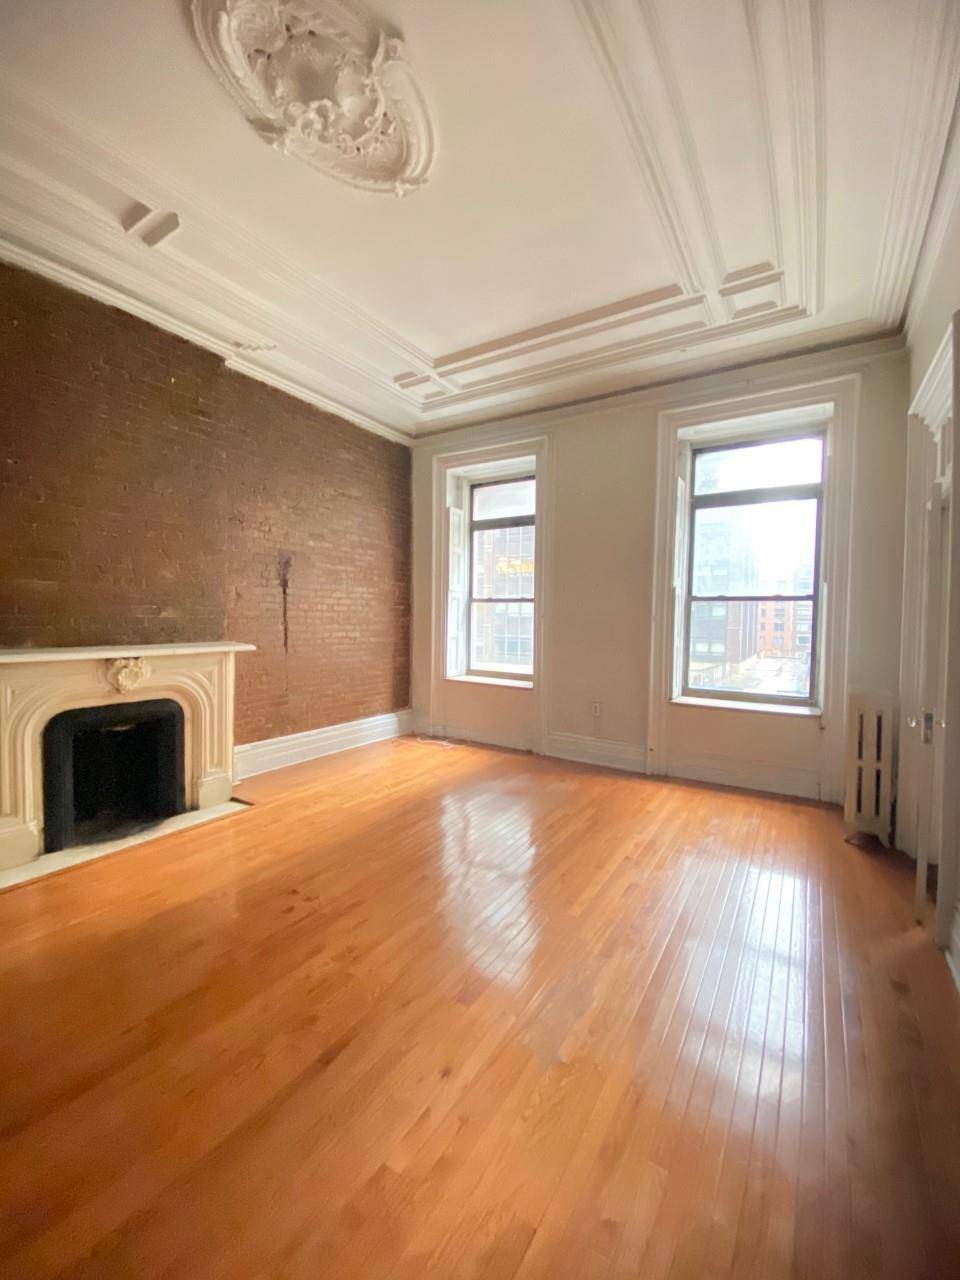 Beautiful and bright one bedroom apartment just few blocks from Columbus Circle and Central Park.